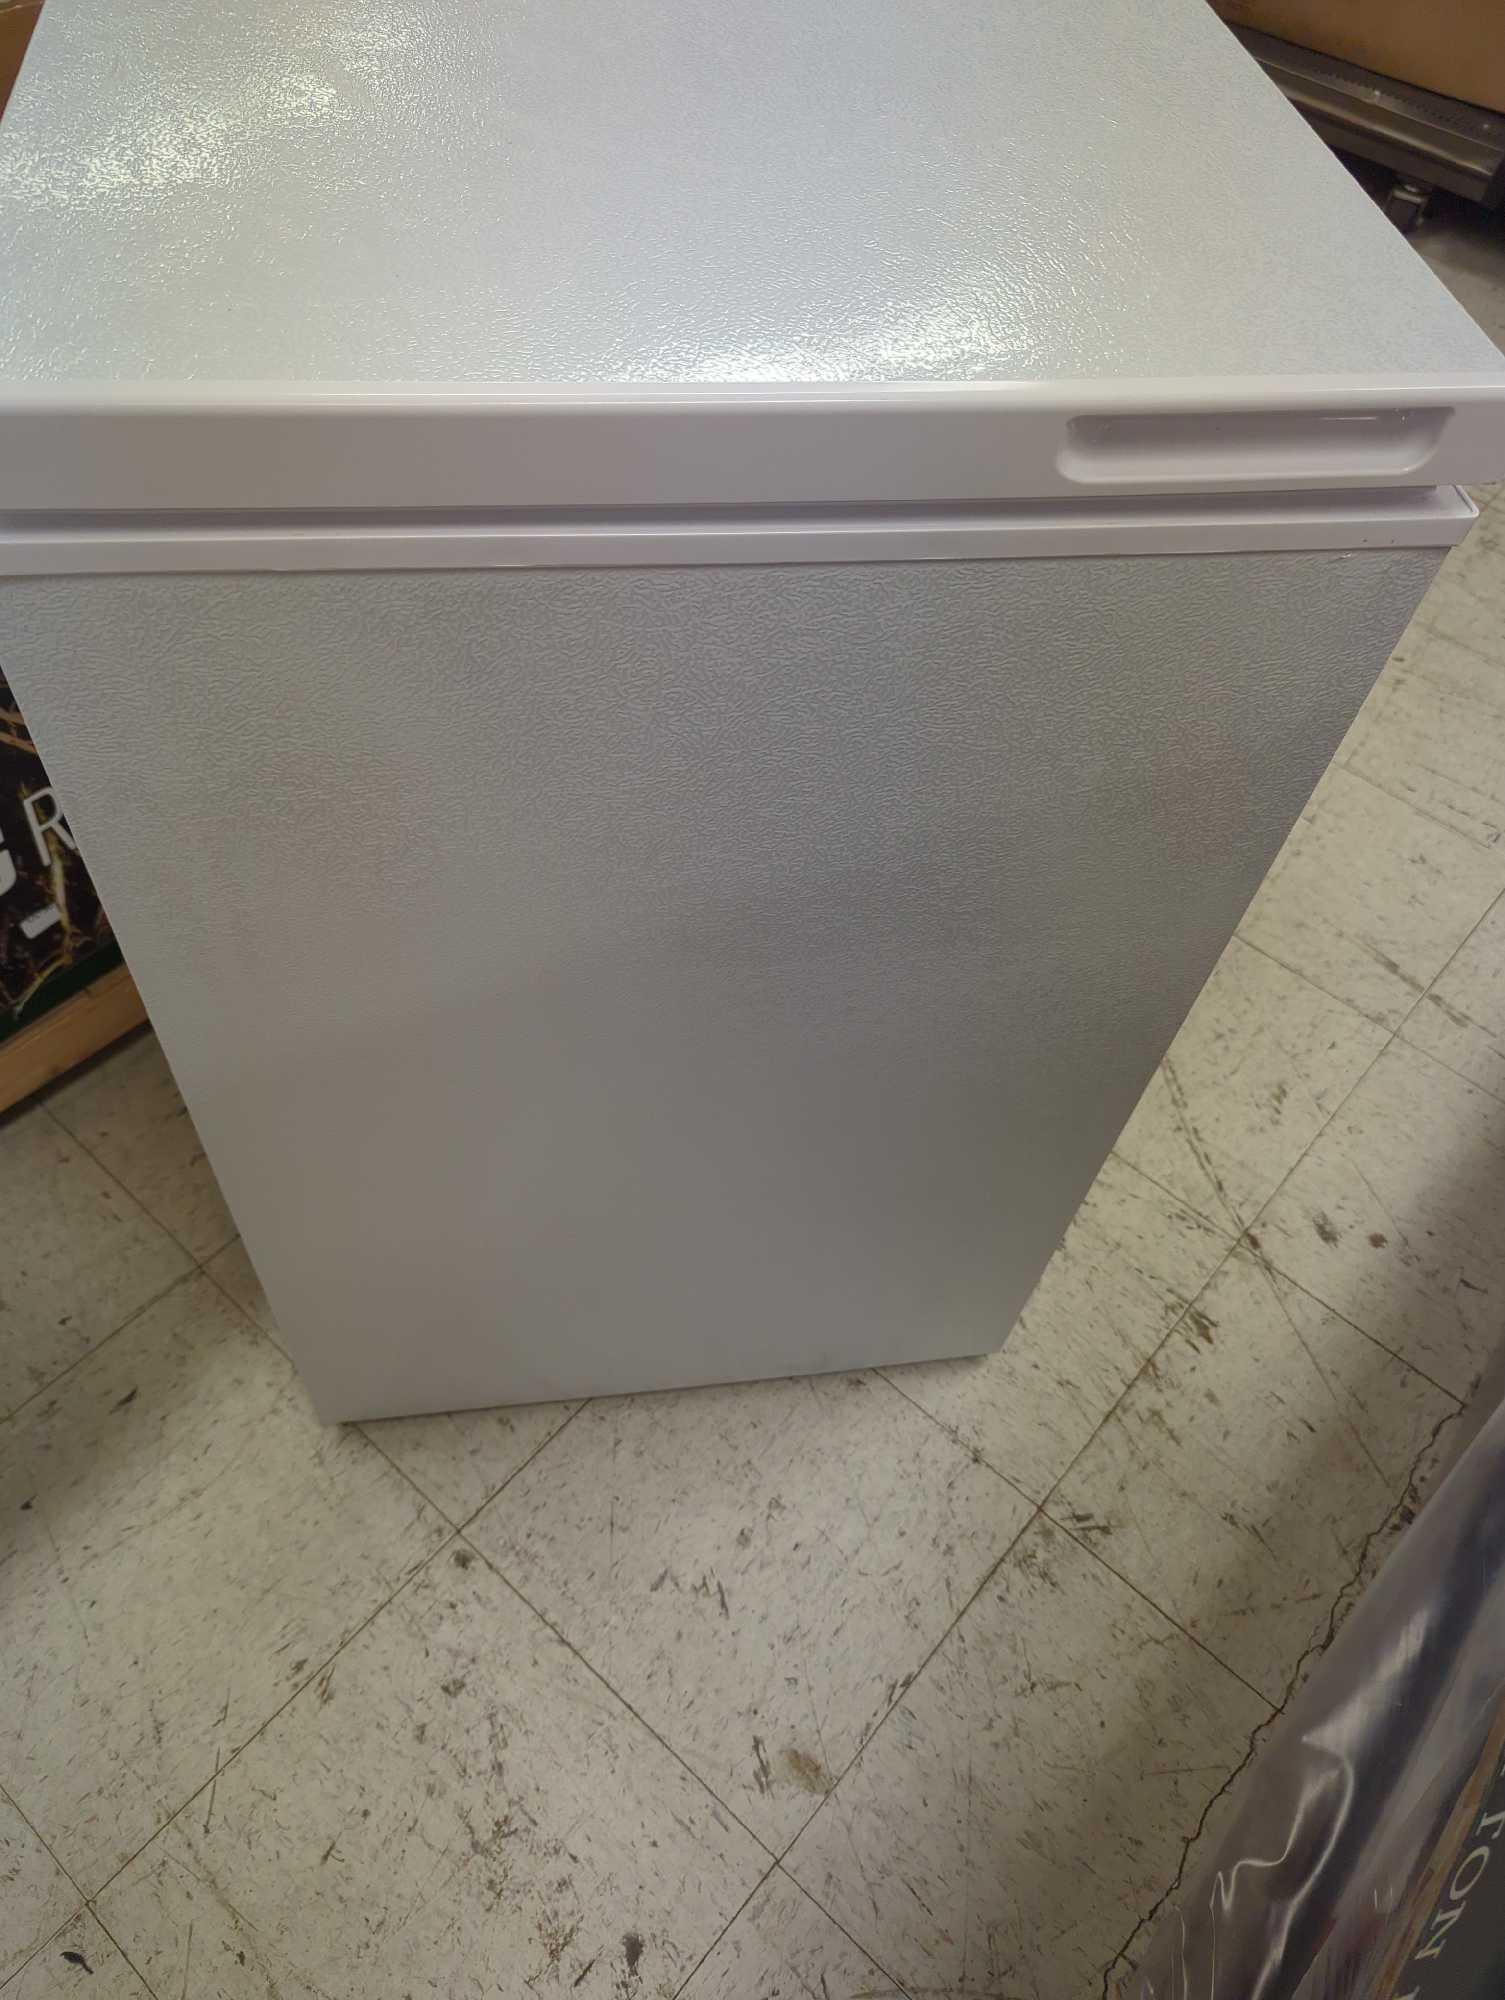 (Has Some Denting) Magic Chef 5.0 cu. ft. Chest Freezer in White, Appears to be New Has Some